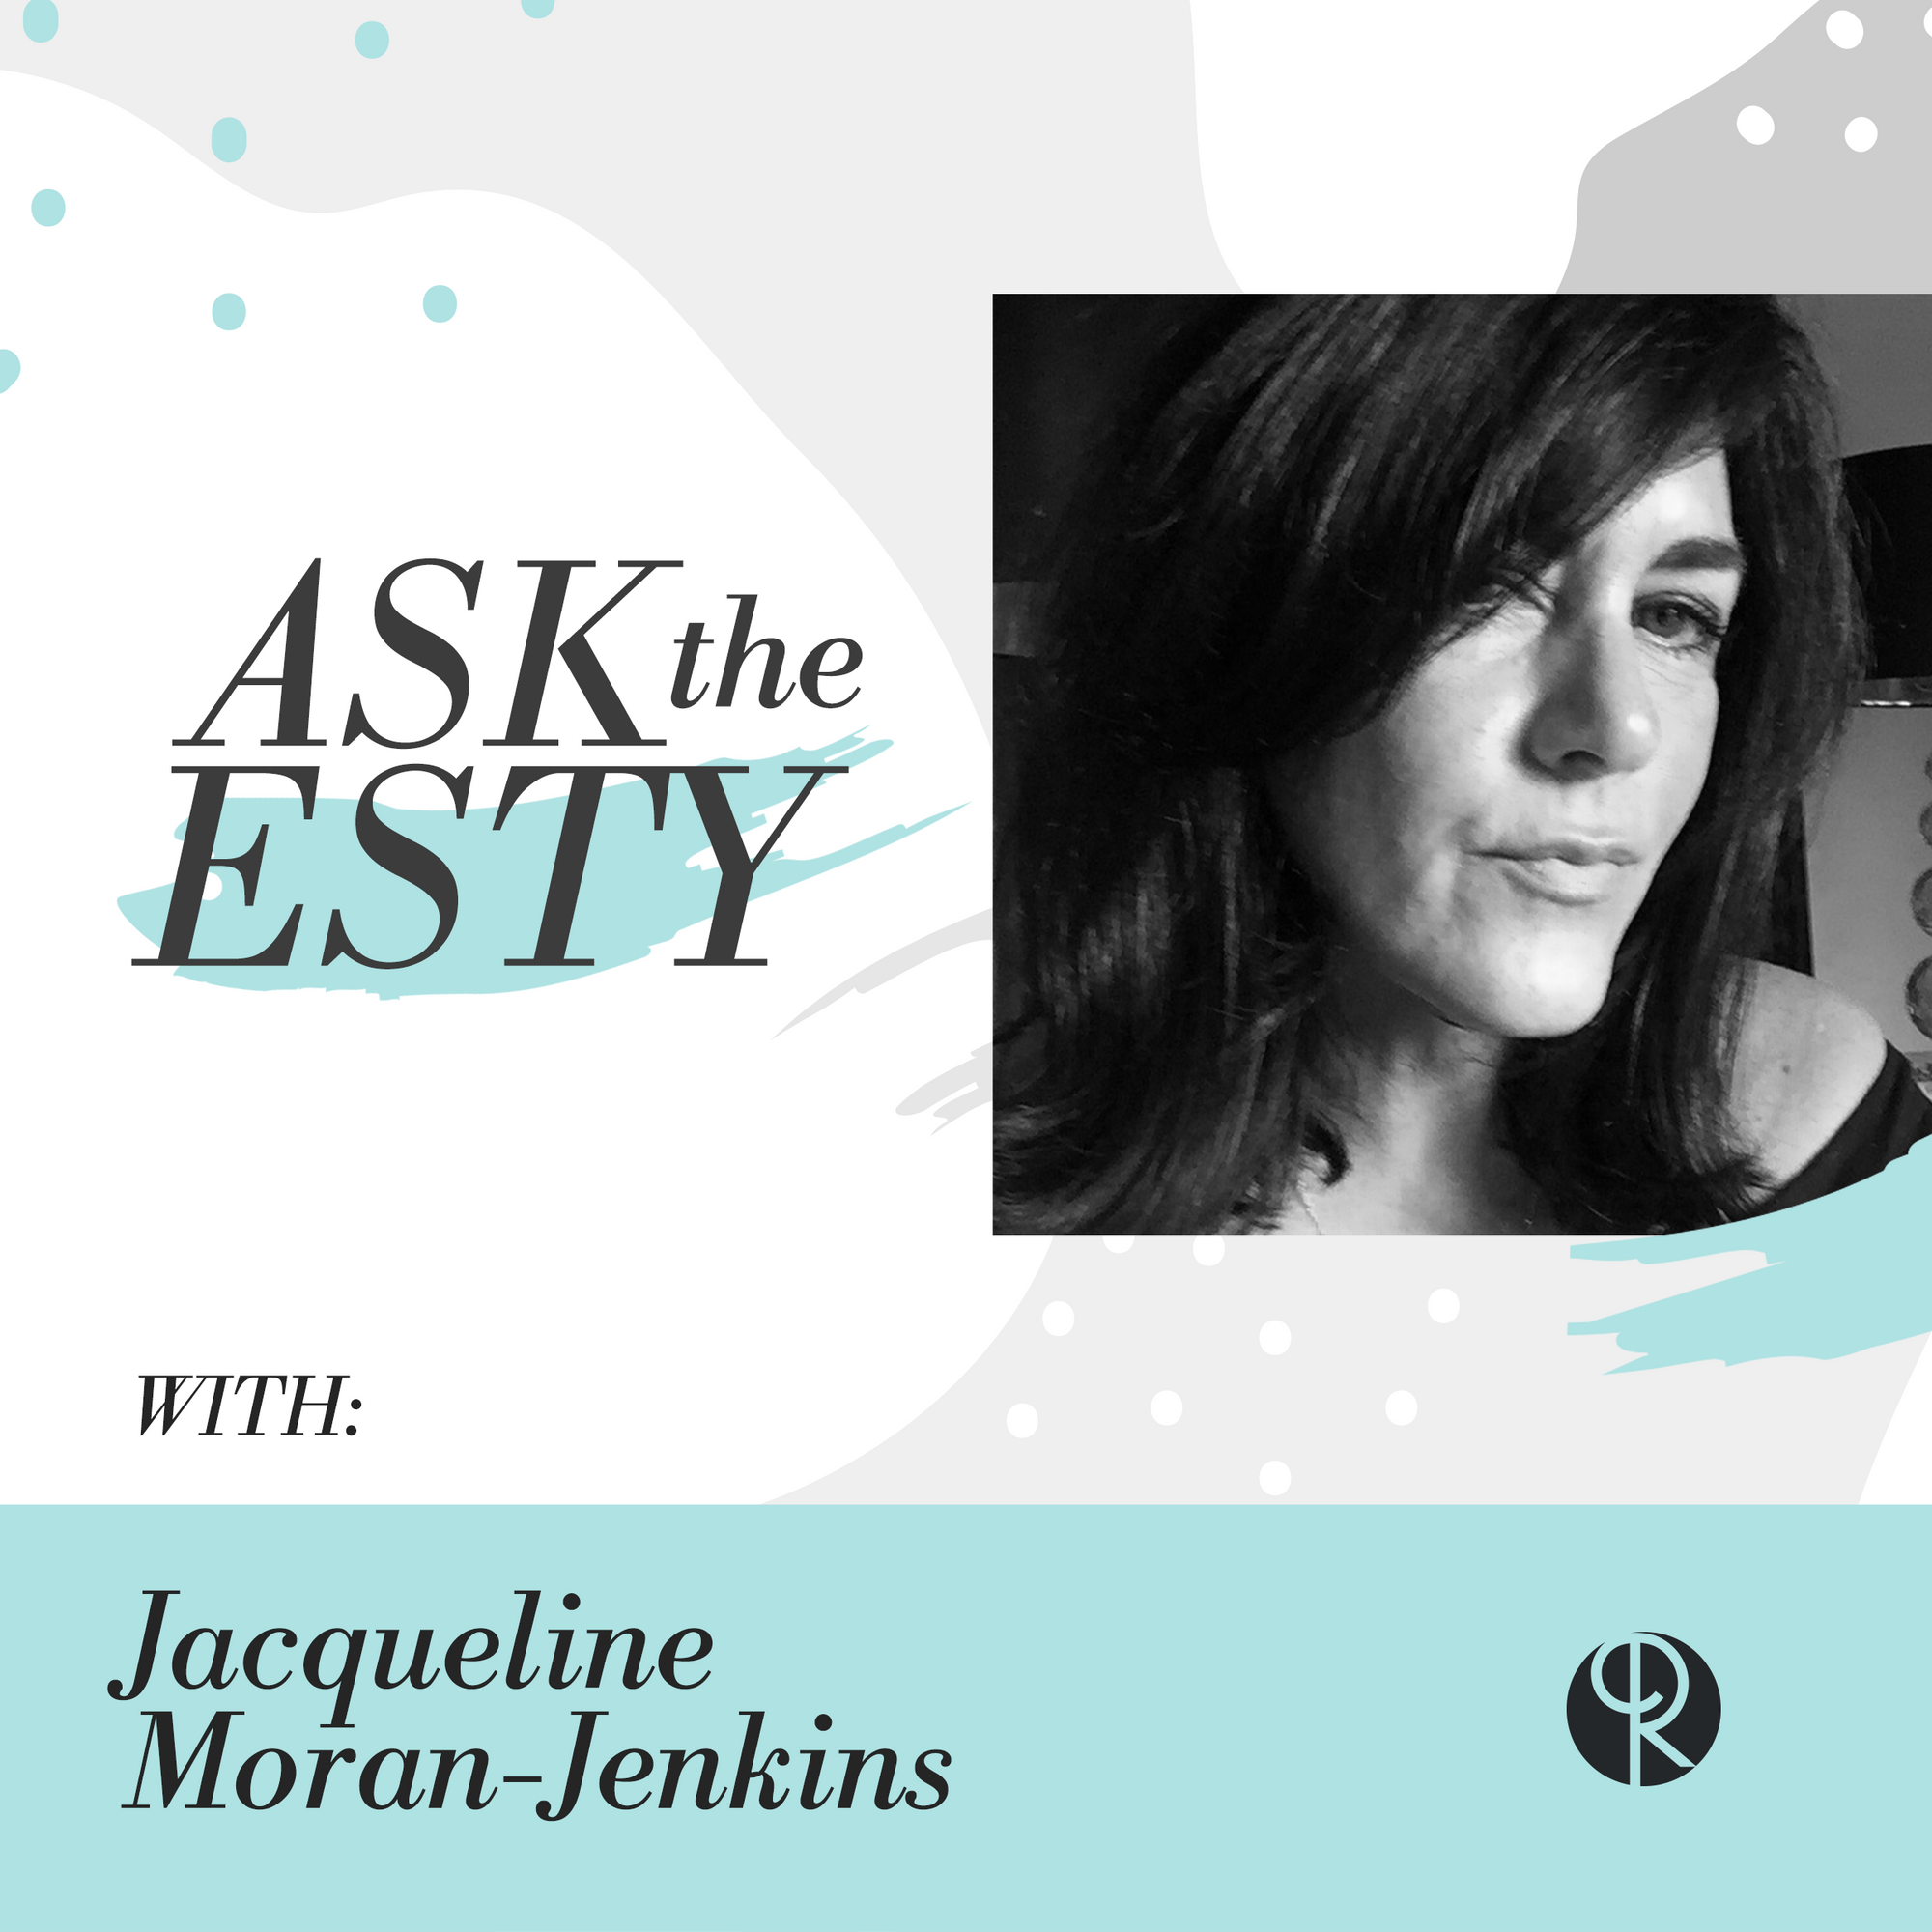 Ask the Esty: NYS Licensed Jacqueline Moran-Jenkins of Tres Aurae Spa